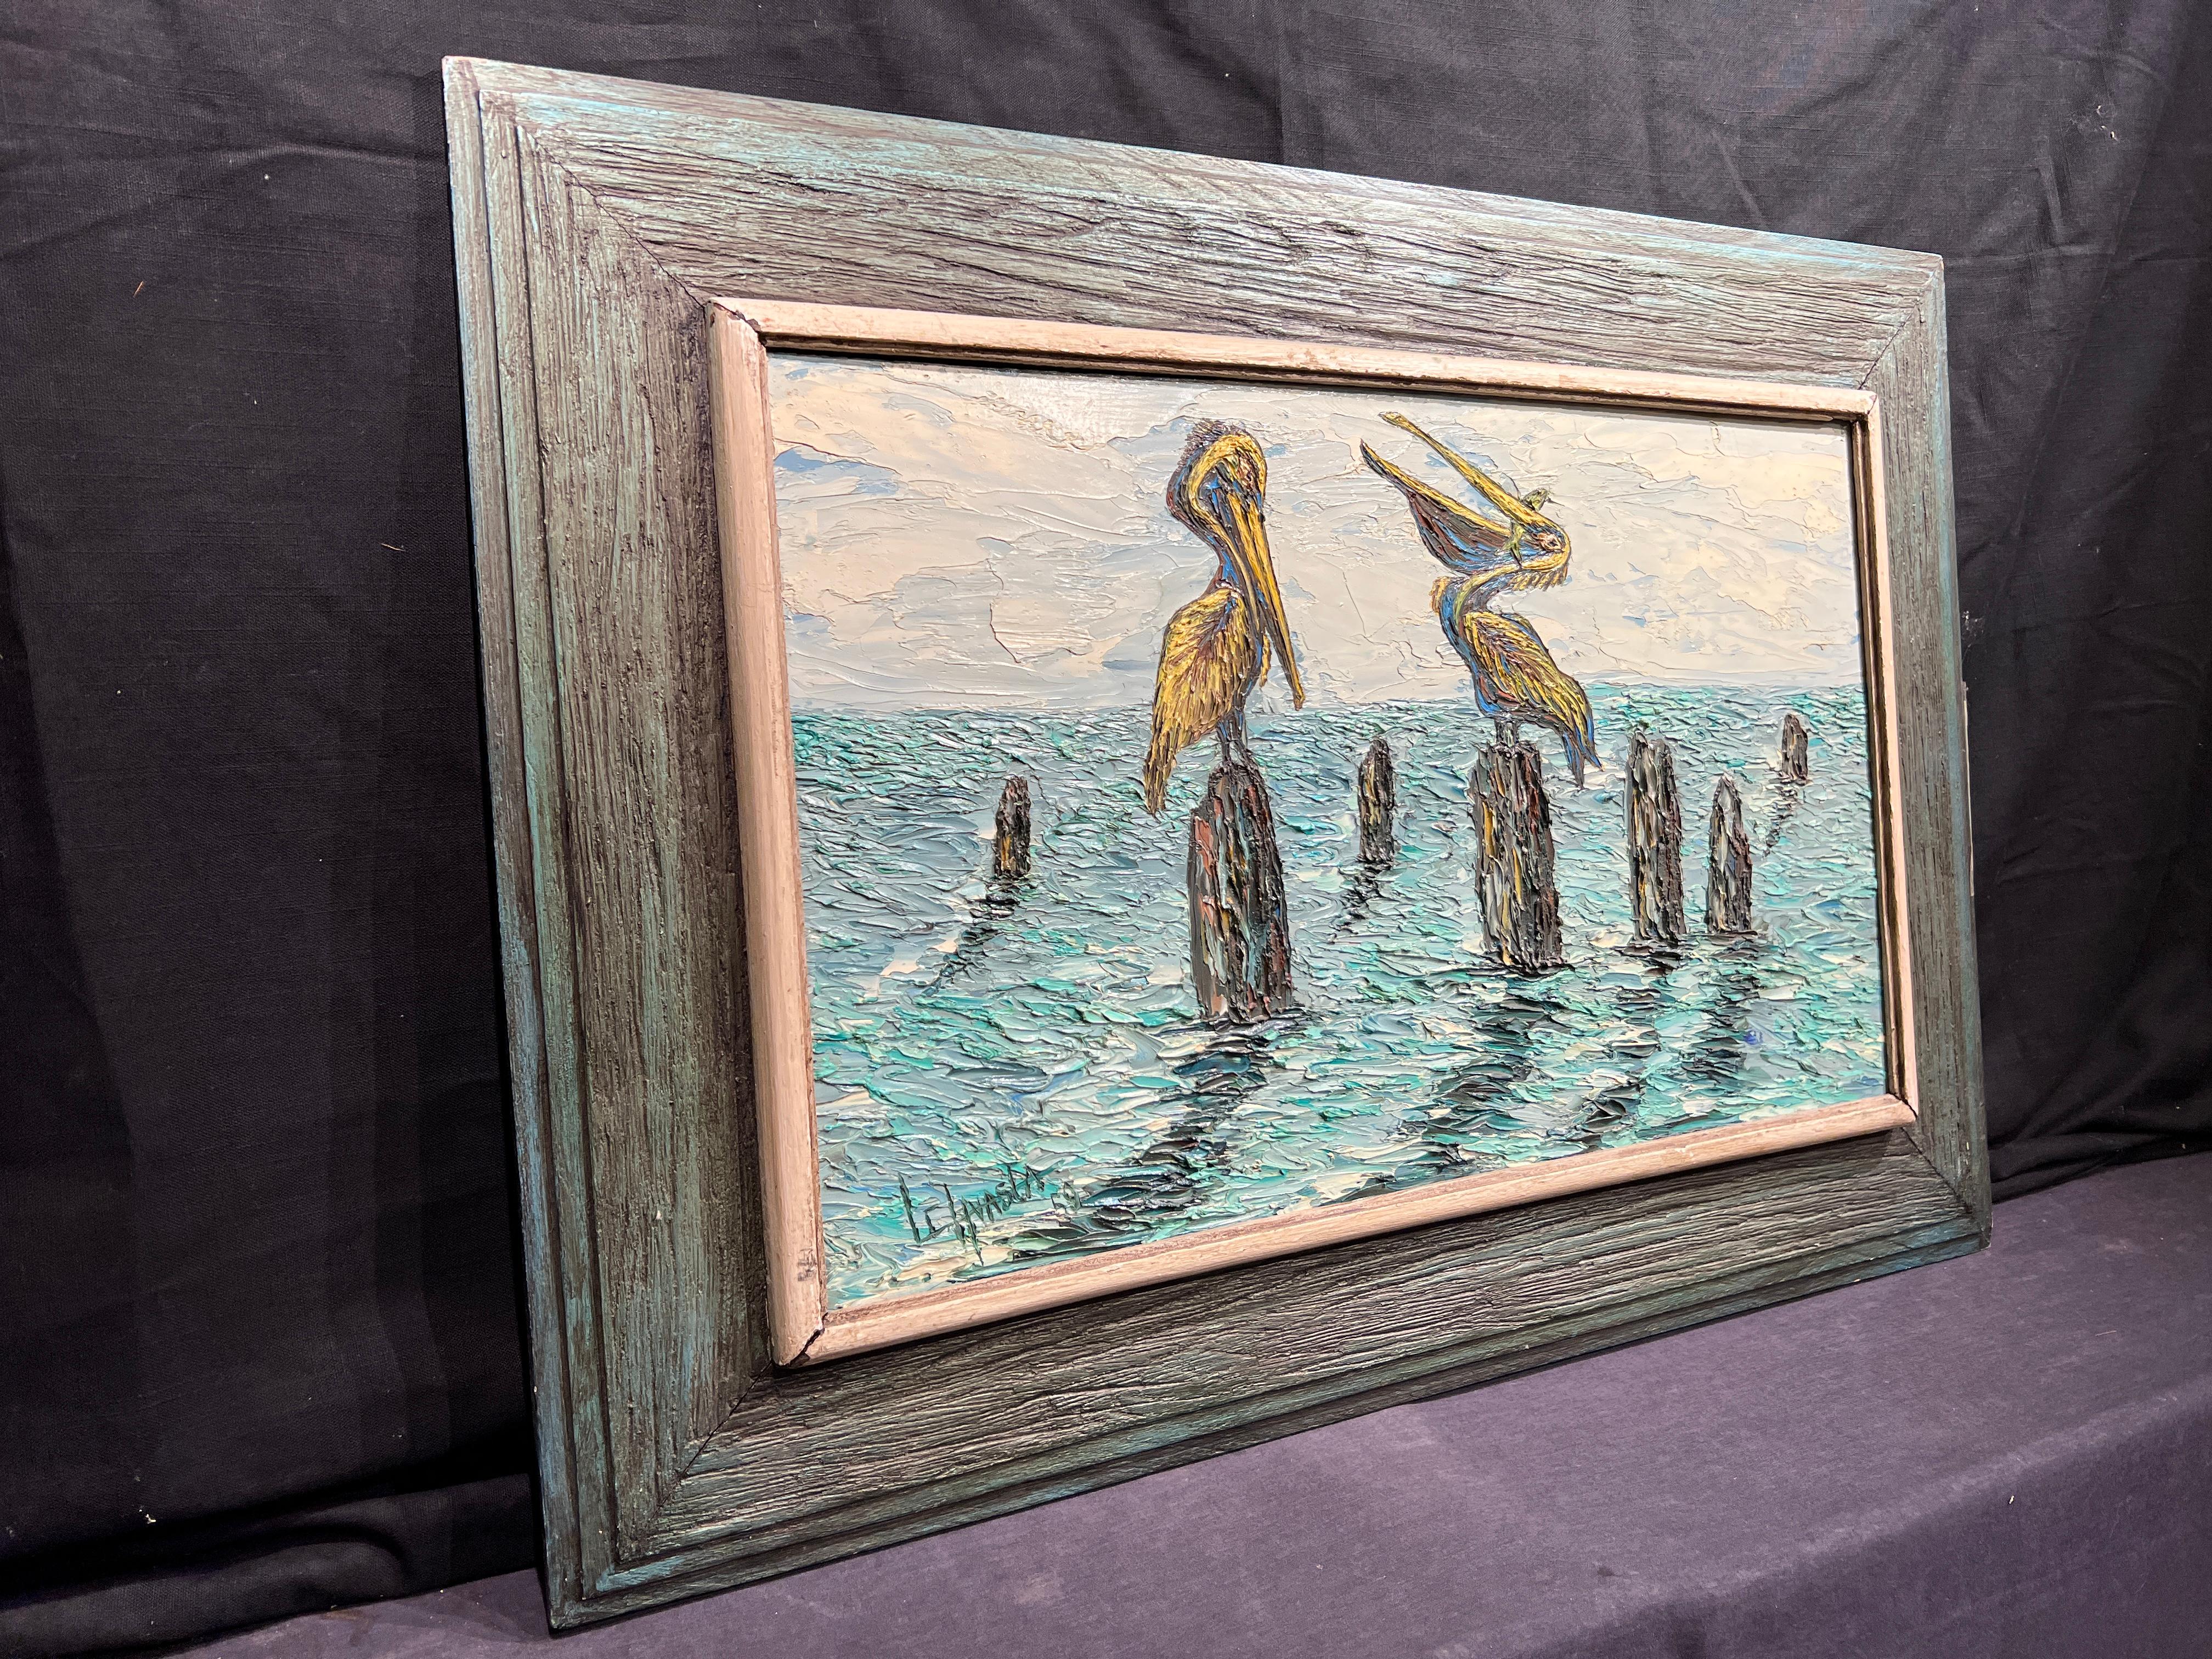 Pelicans by Louis Carl Hvasta (1913-1993)
Signed and Dated Lower Left
Unframed: 15